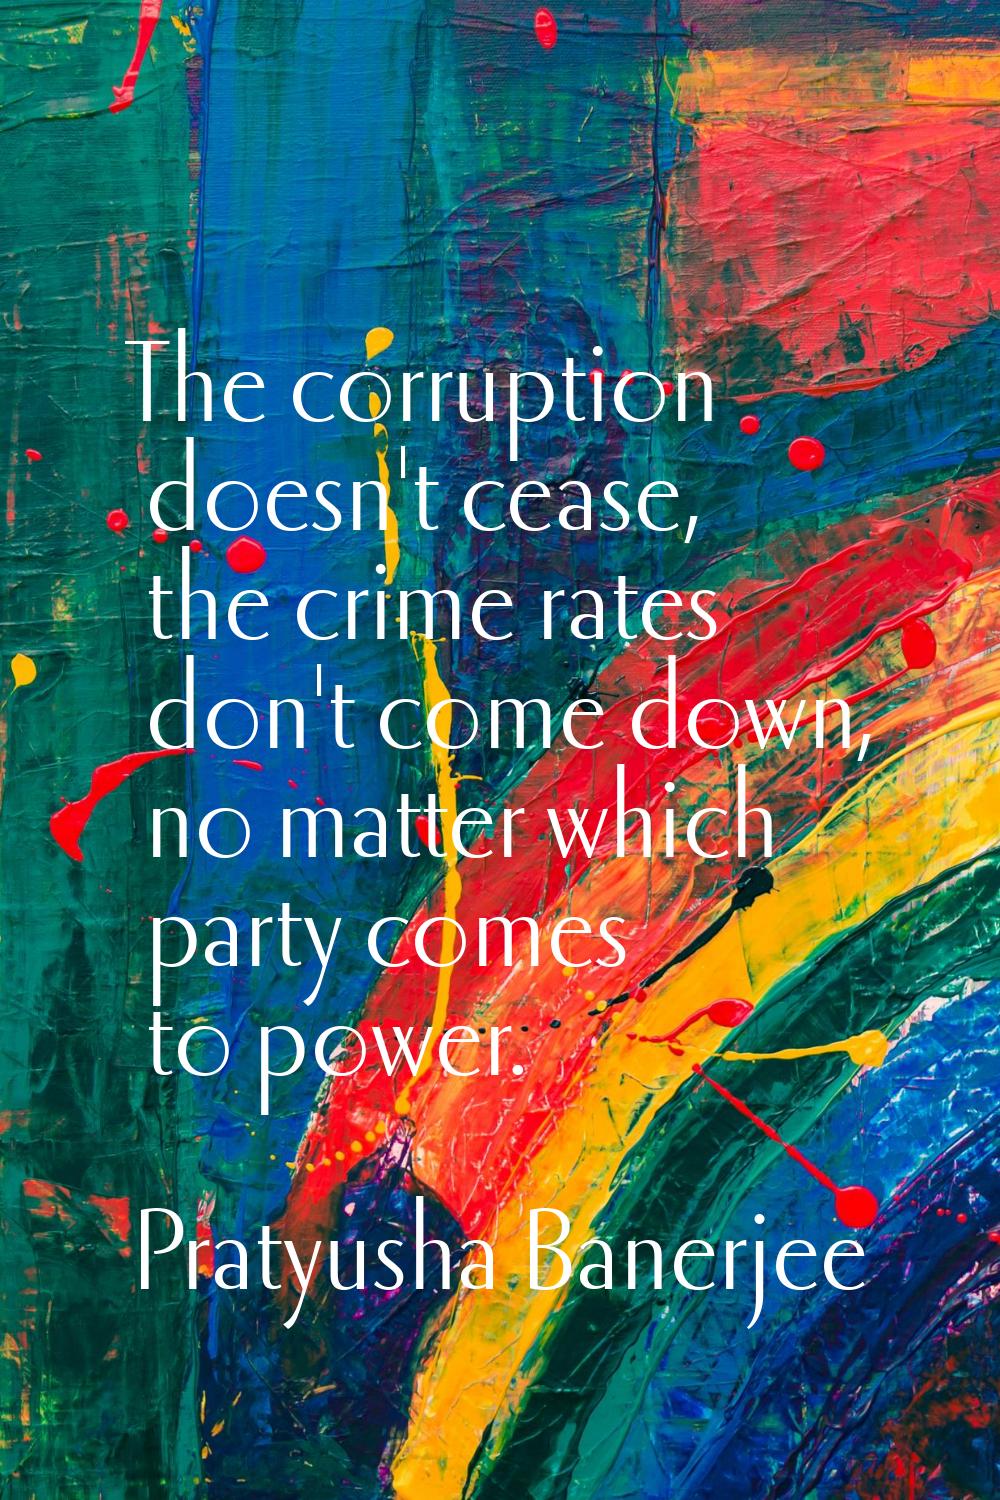 The corruption doesn't cease, the crime rates don't come down, no matter which party comes to power